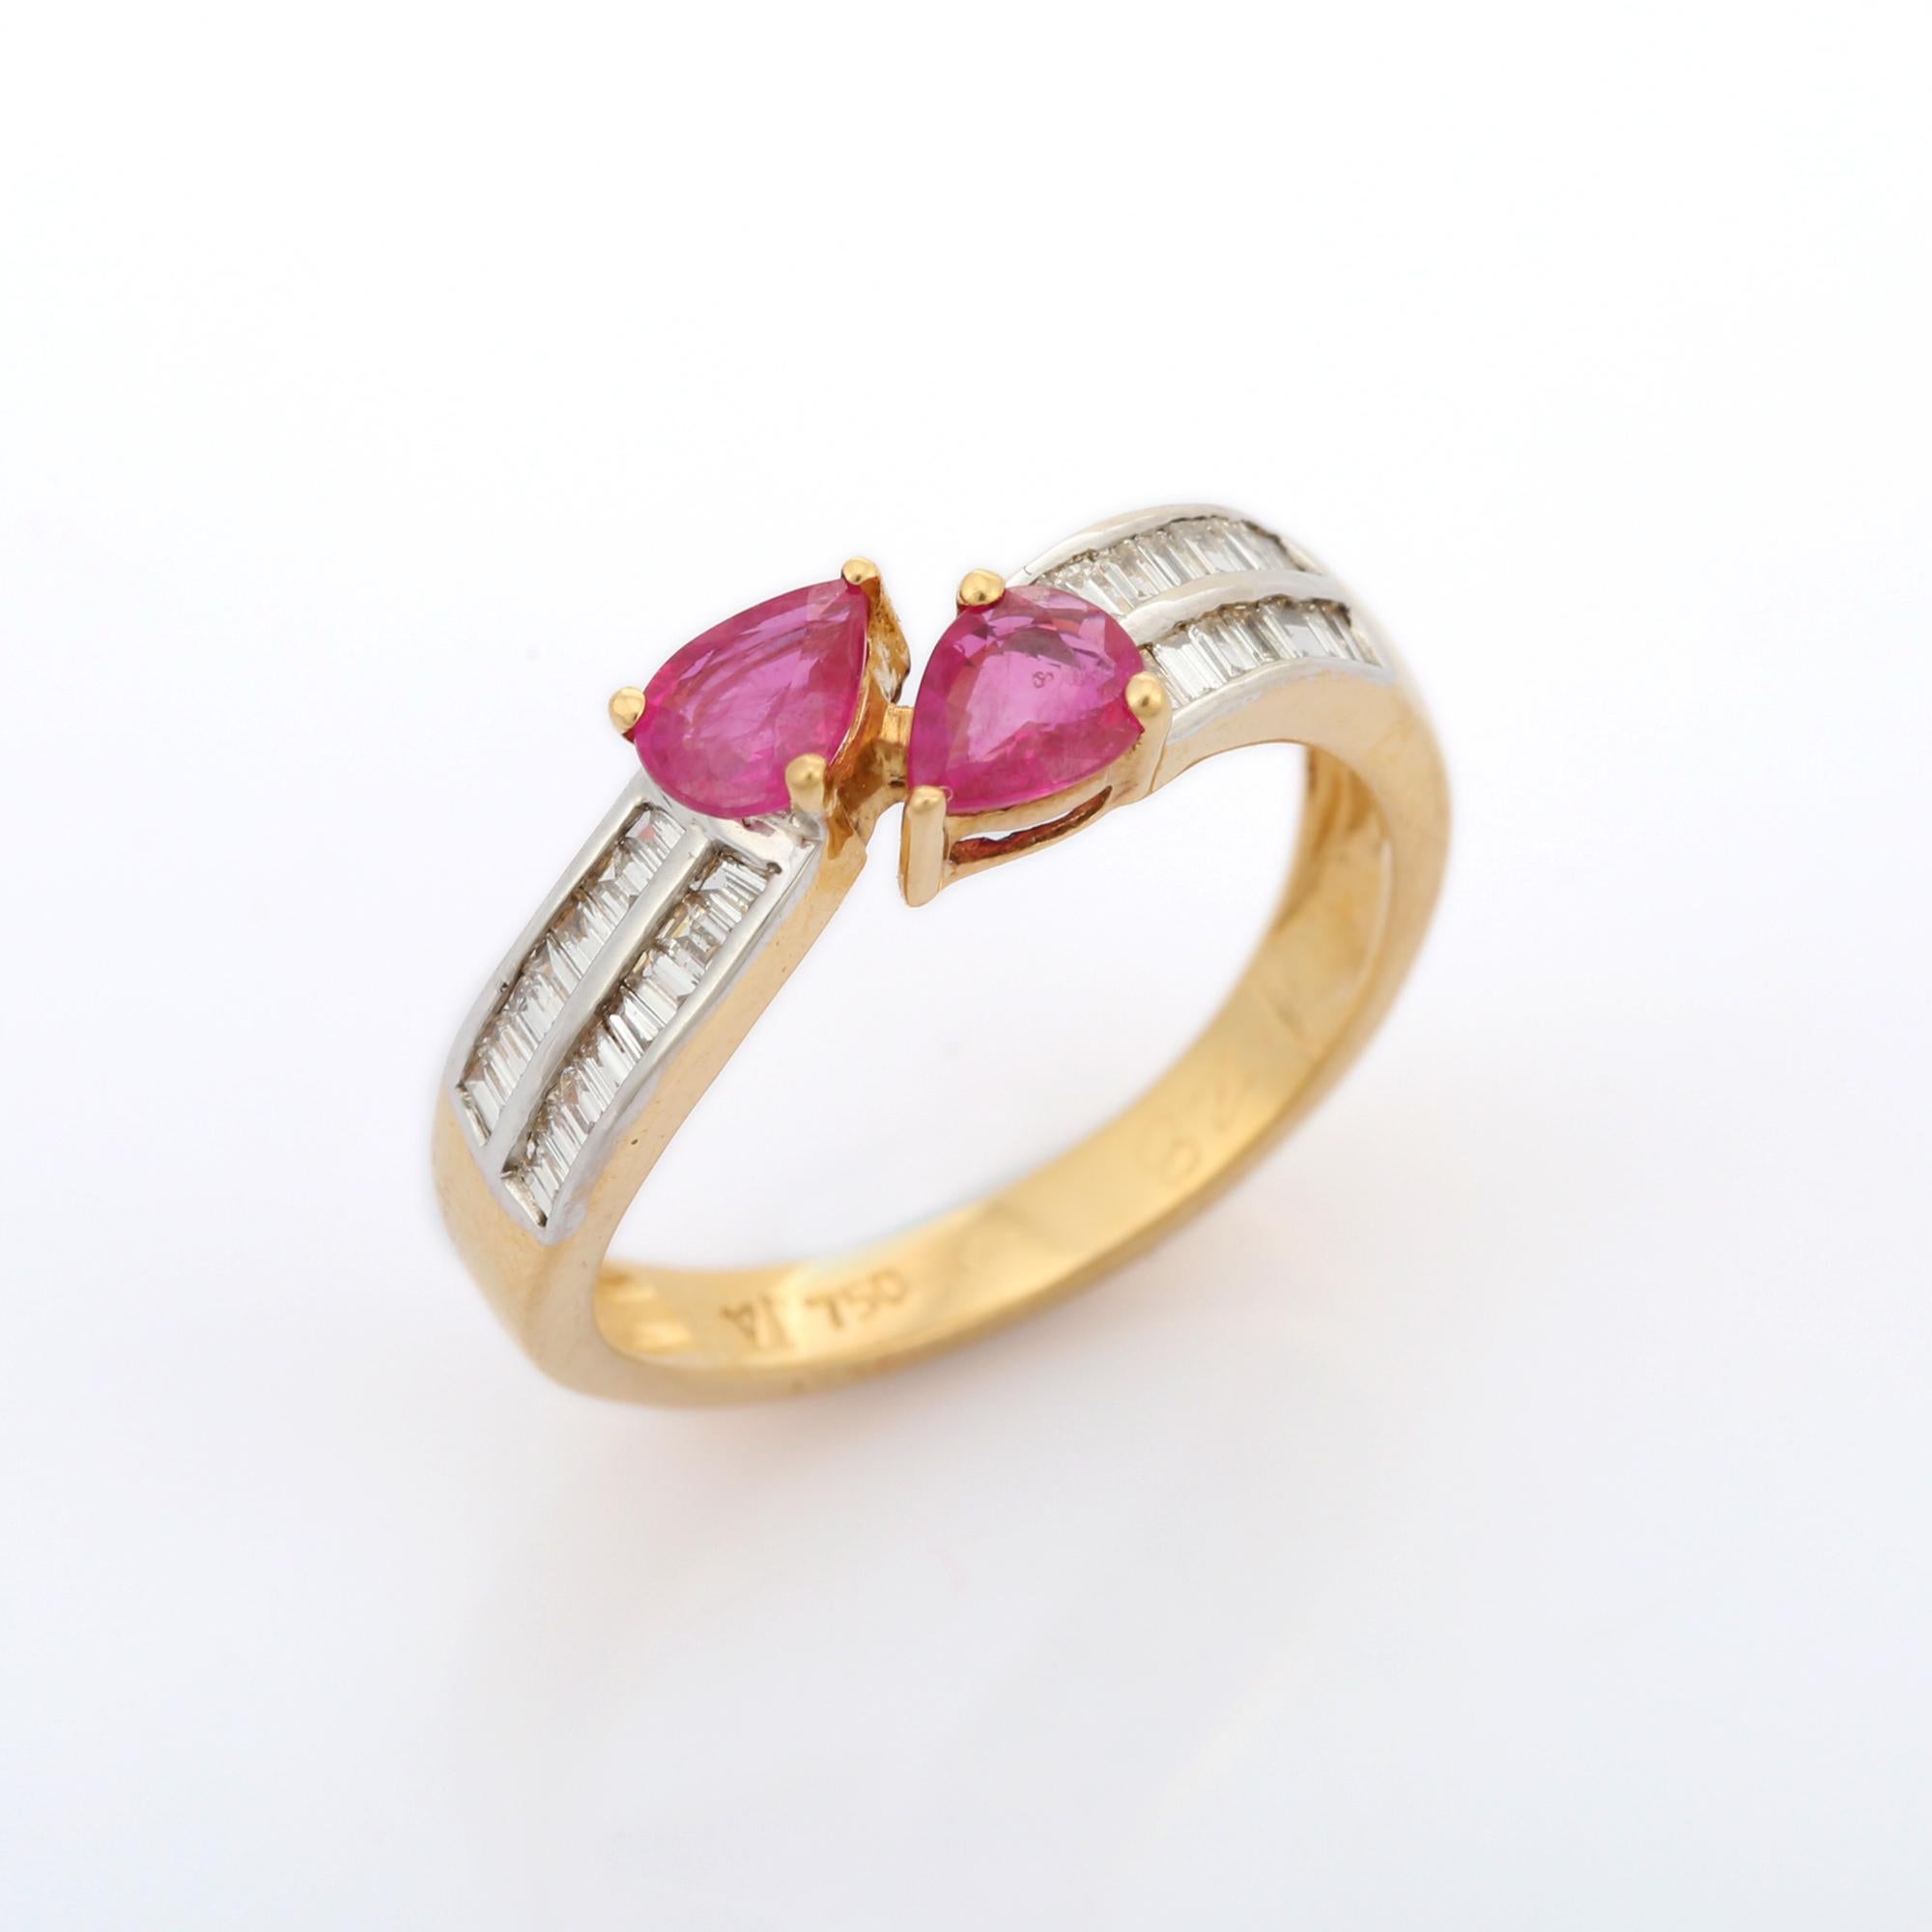 For Sale:  Handcrafted 18K Solid Yellow Gold Pear Cut Ruby and Diamond Wrap Around Ring 5